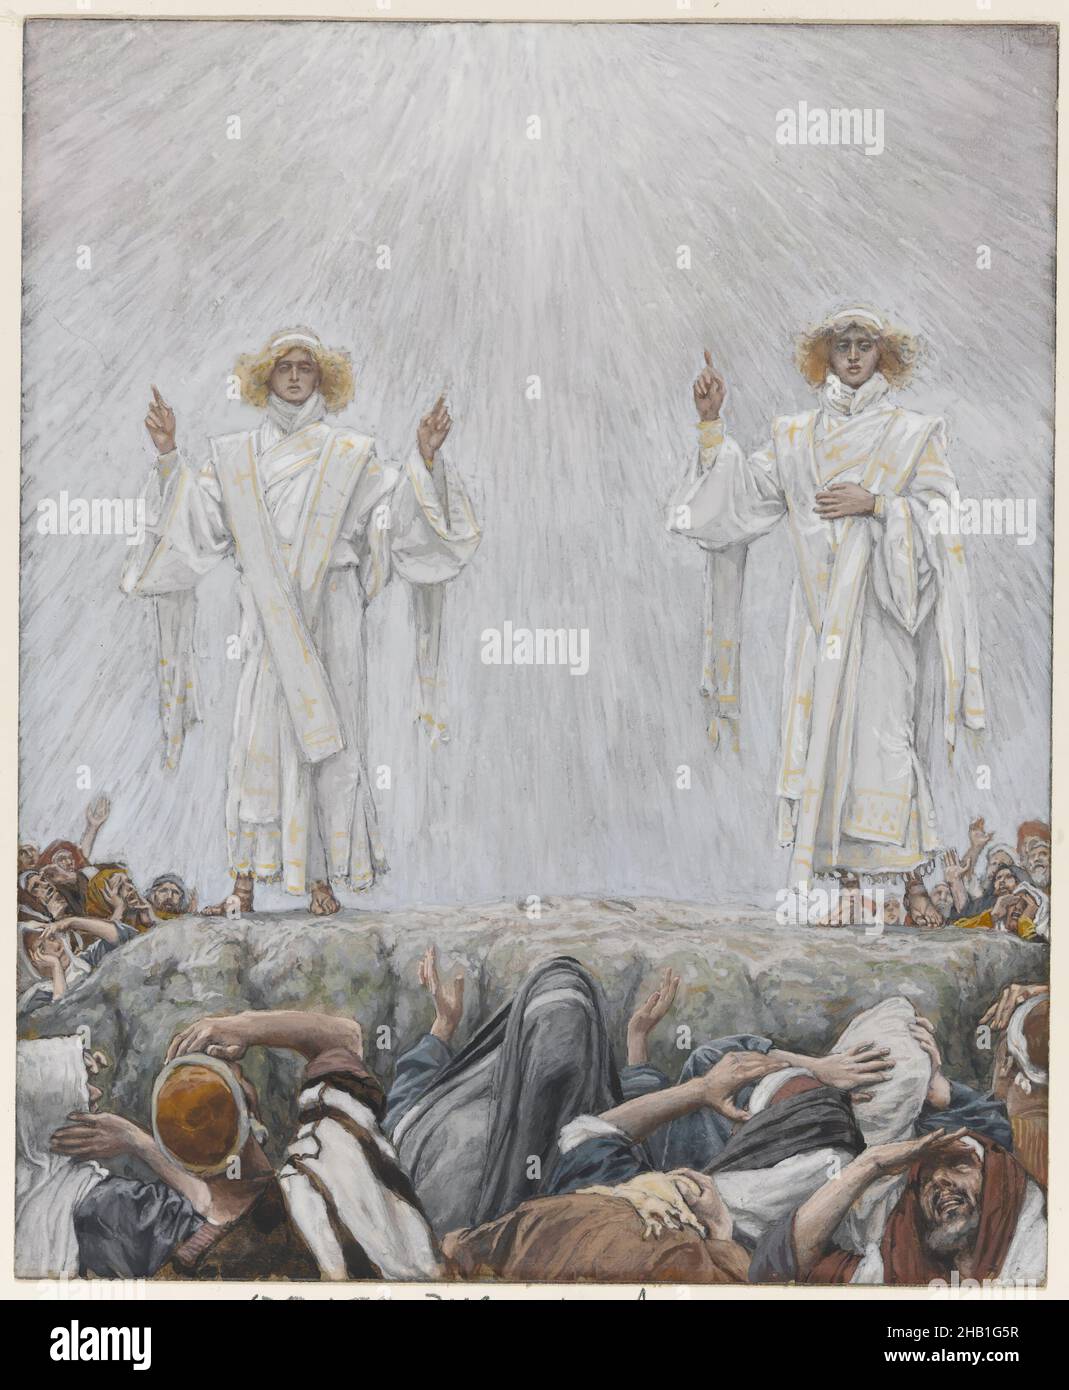 The Ascension, The Life of Our Lord Jesus Christ, La Vie de Notre-Seigneur Jésus-Christ, James Tissot, French, 1836-1902, Opaque watercolor over graphite on gray wove paper, France, 1886-1894, Image: 7 9/16 x 6 3/16 in., 19.2 x 15.7 cm, angel, disciples, Jesus Stock Photo